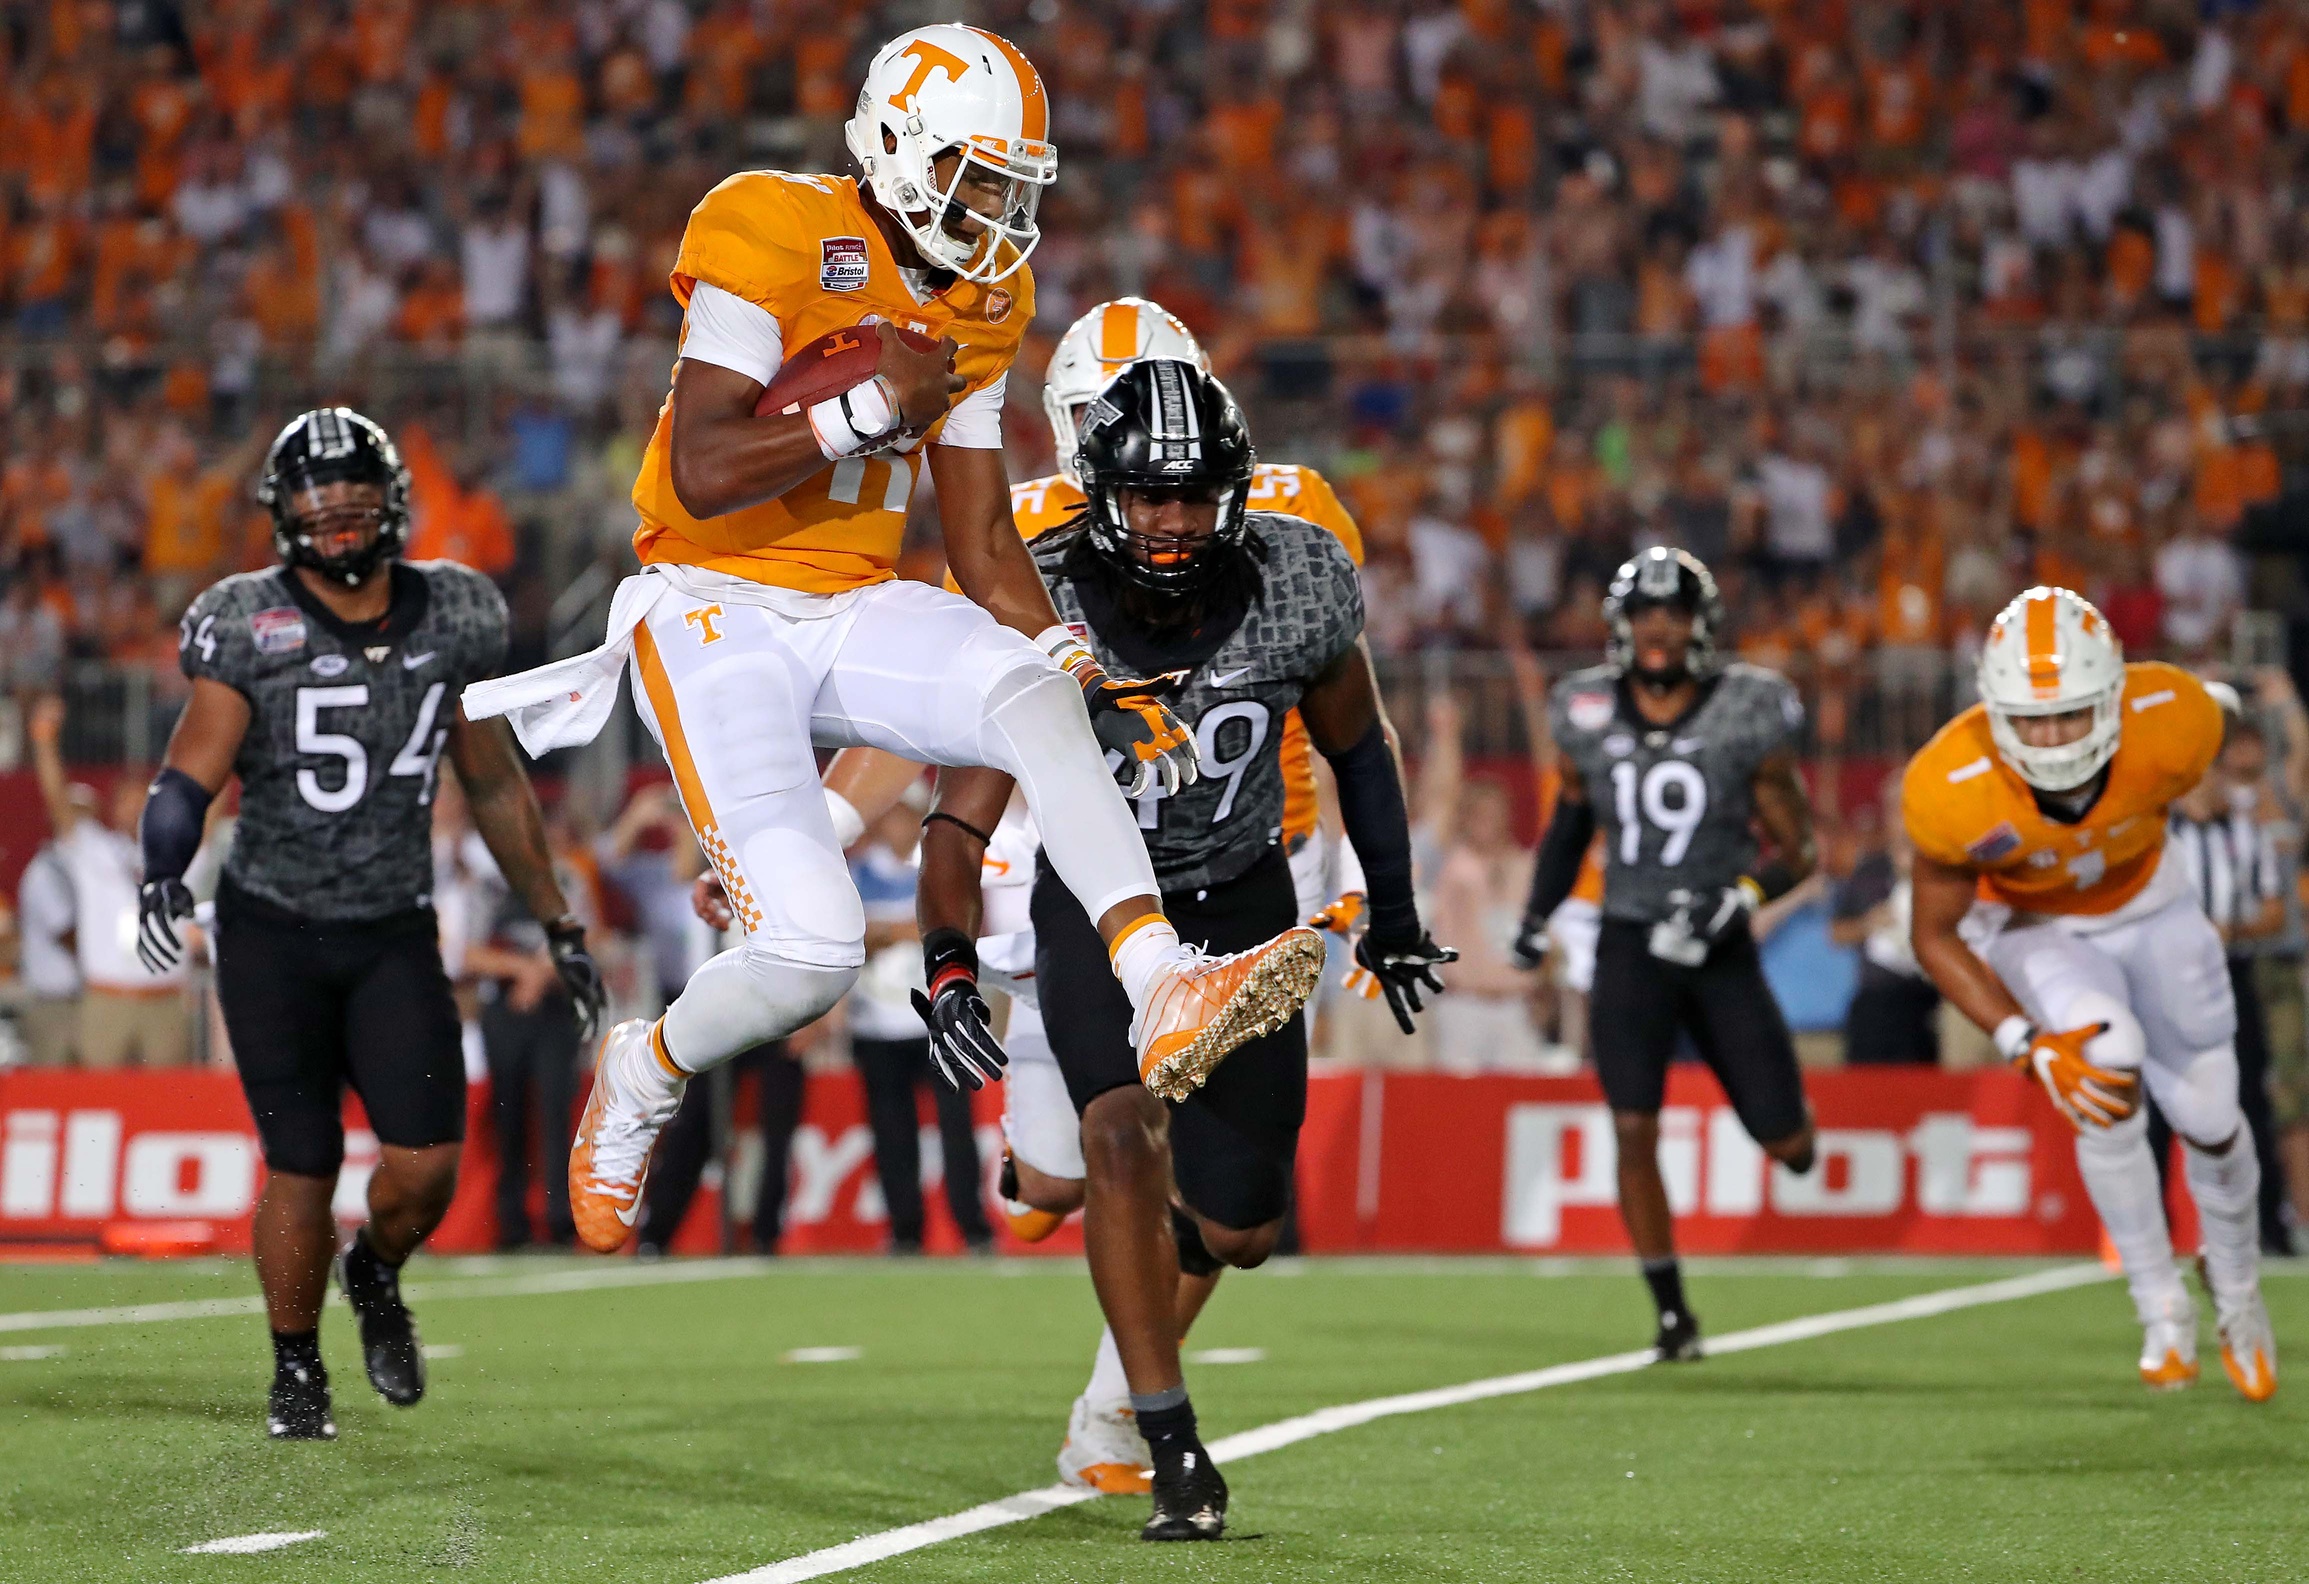 Sep 10, 2016; Bristol, TN, USA; Tennessee Volunteers quarterback Joshua Dobbs (11) scores a touchdown against the Virginia Tech Hokies during the second quarter at Bristol Motor Speedway. Mandatory Credit: Peter Casey-USA TODAY Sports